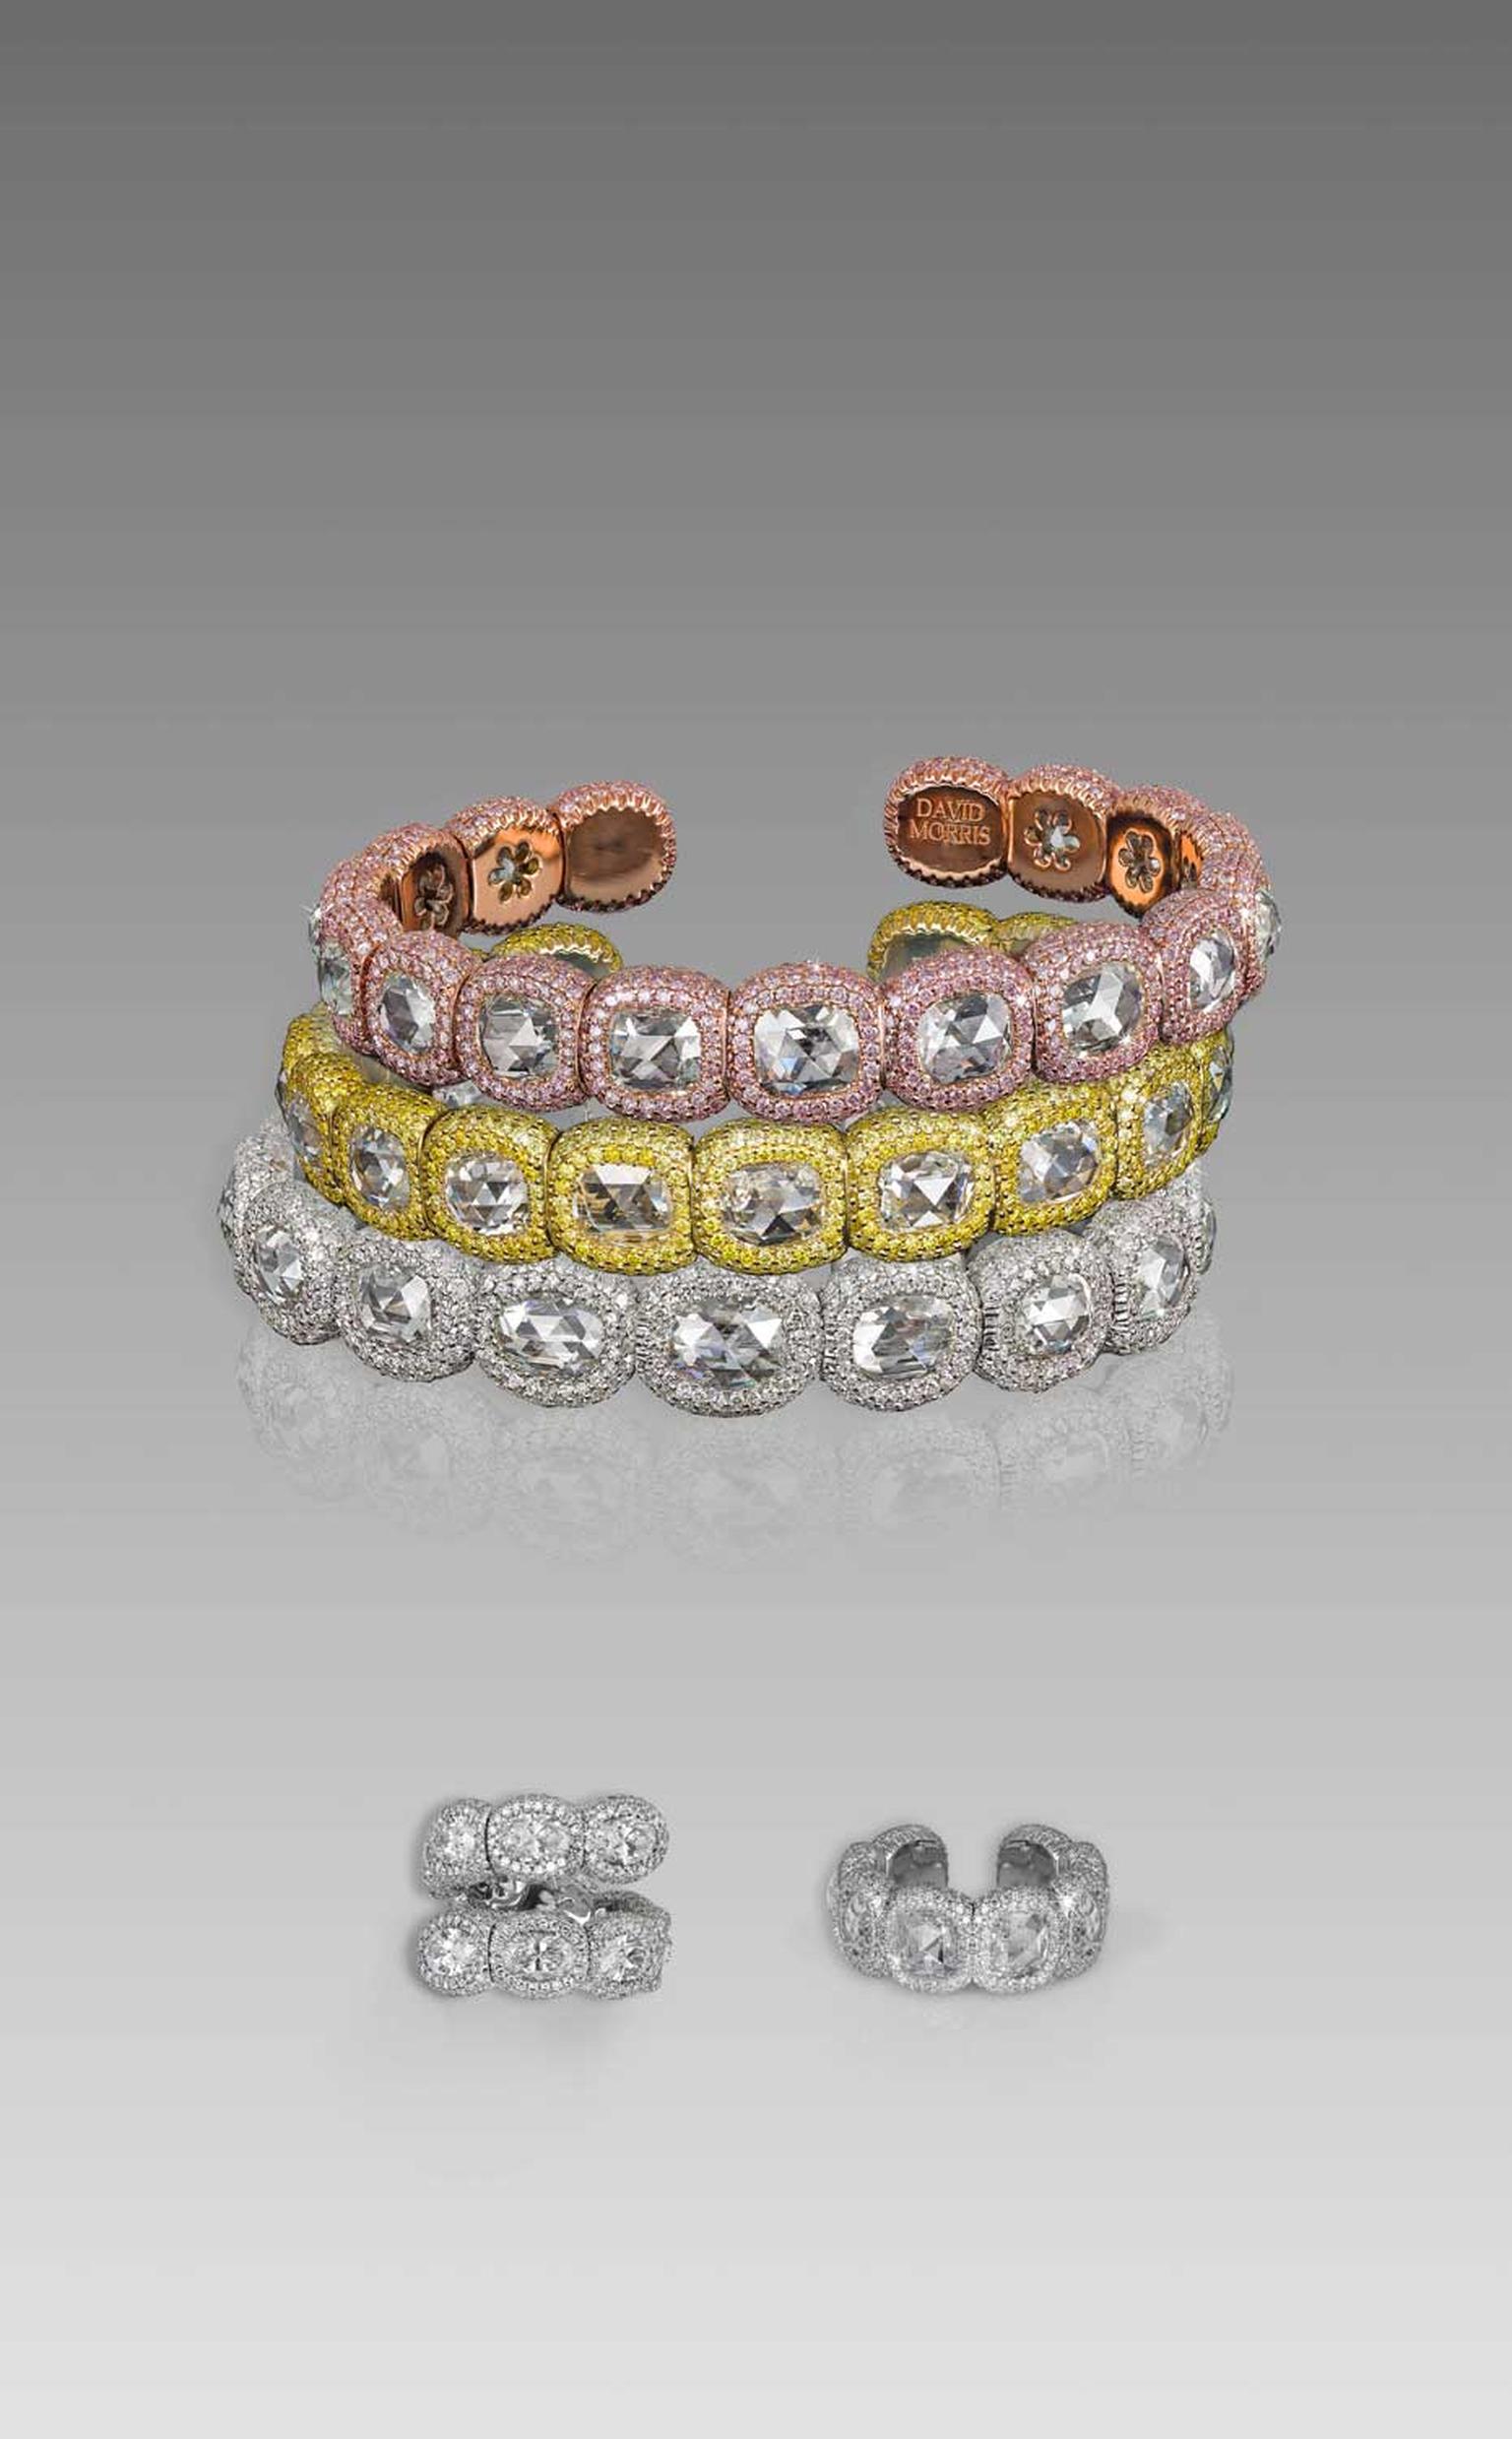 The newest jewels in David Morris' Rose-Cut collection include bangles and rings in either white gold with white micro-set diamonds, yellow gold with yellow micro-set diamonds, or rose gold with pink micro-set diamonds, all set with rose-cut diamonds.